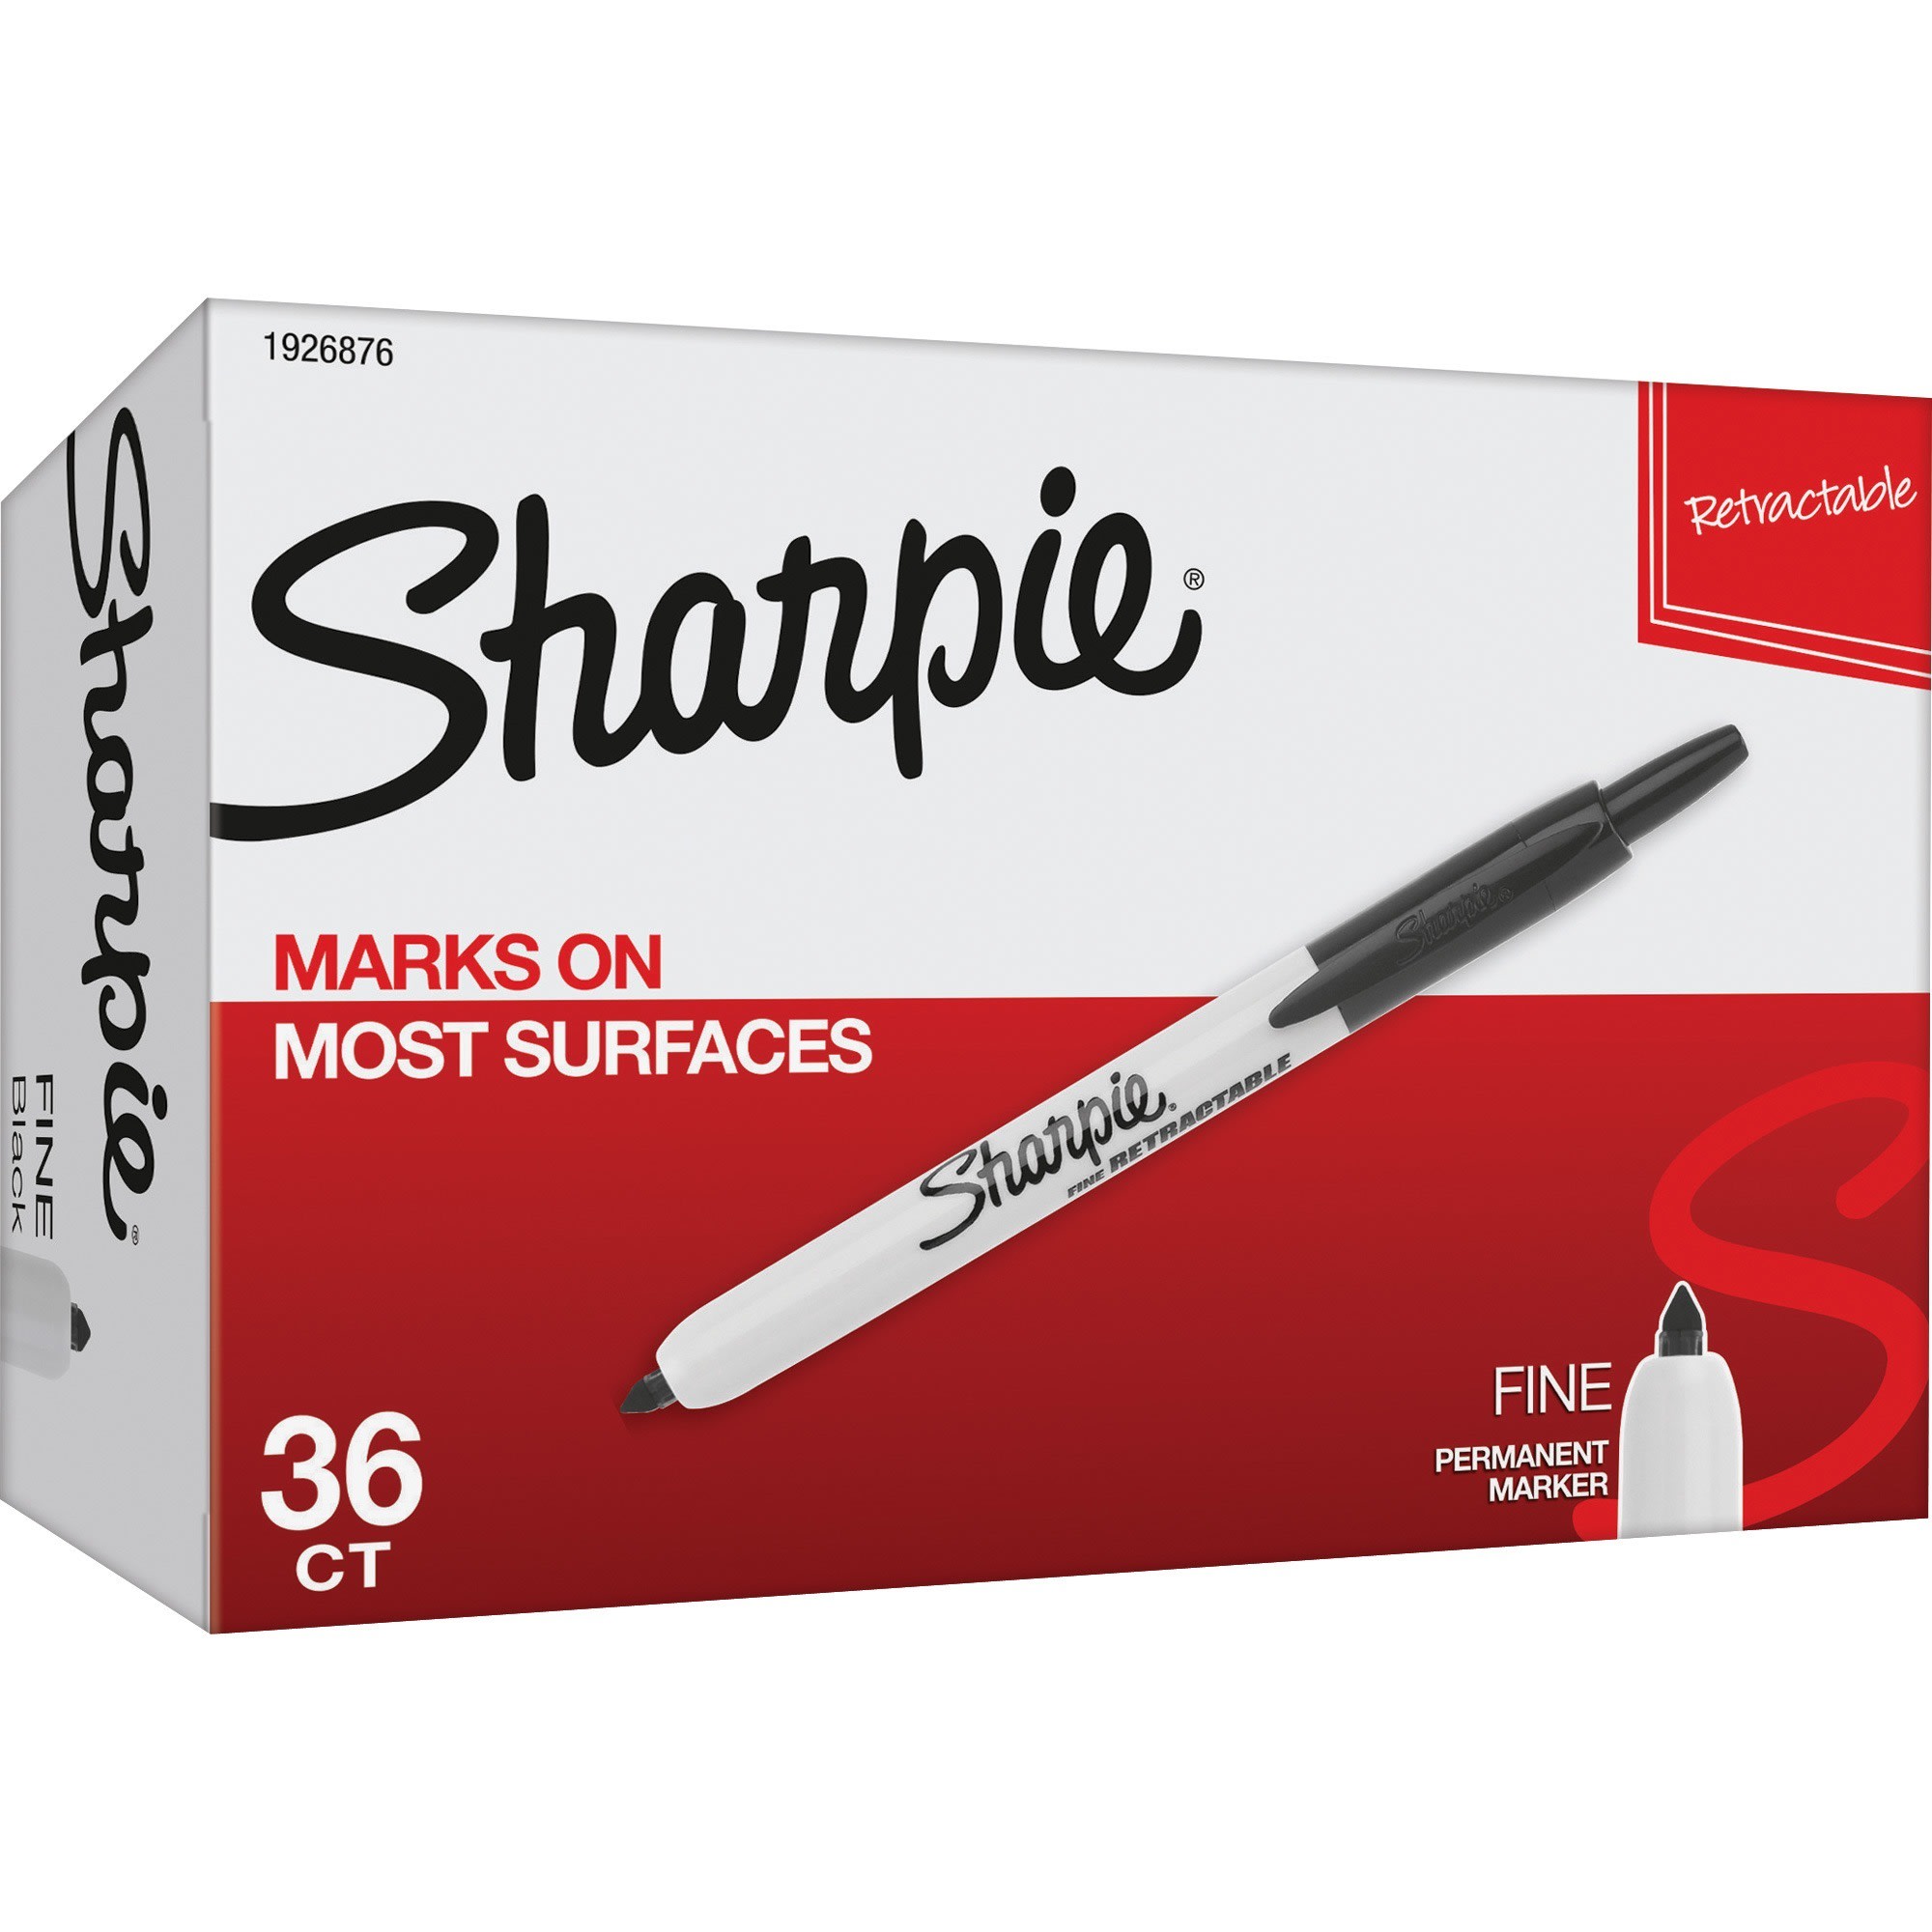 https://media.officedepot.com/image/upload/v1666030708/content/AEM%20Images%20%28WWW%2CODP%29/Office%20Supplies/Pens%2C%20Pencils%20and%20Markers/Markers%20and%20Highlighters/Permanent%20Markers.jpg